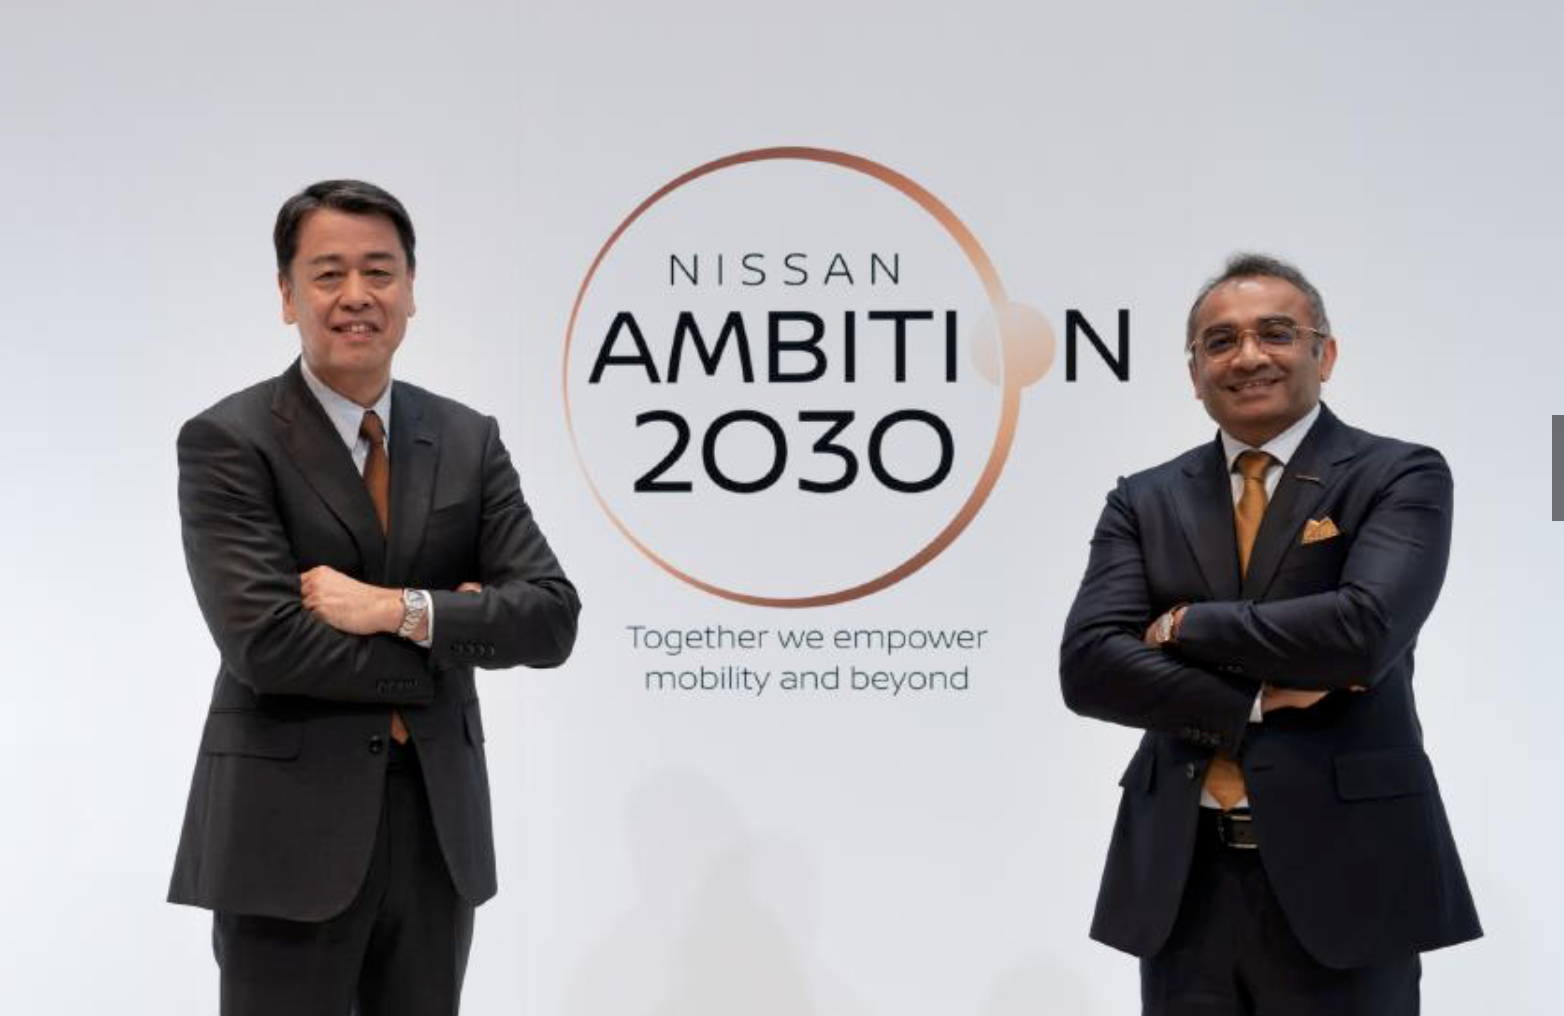 Nissan aims at 50% electrified with solid-state battery in 2030